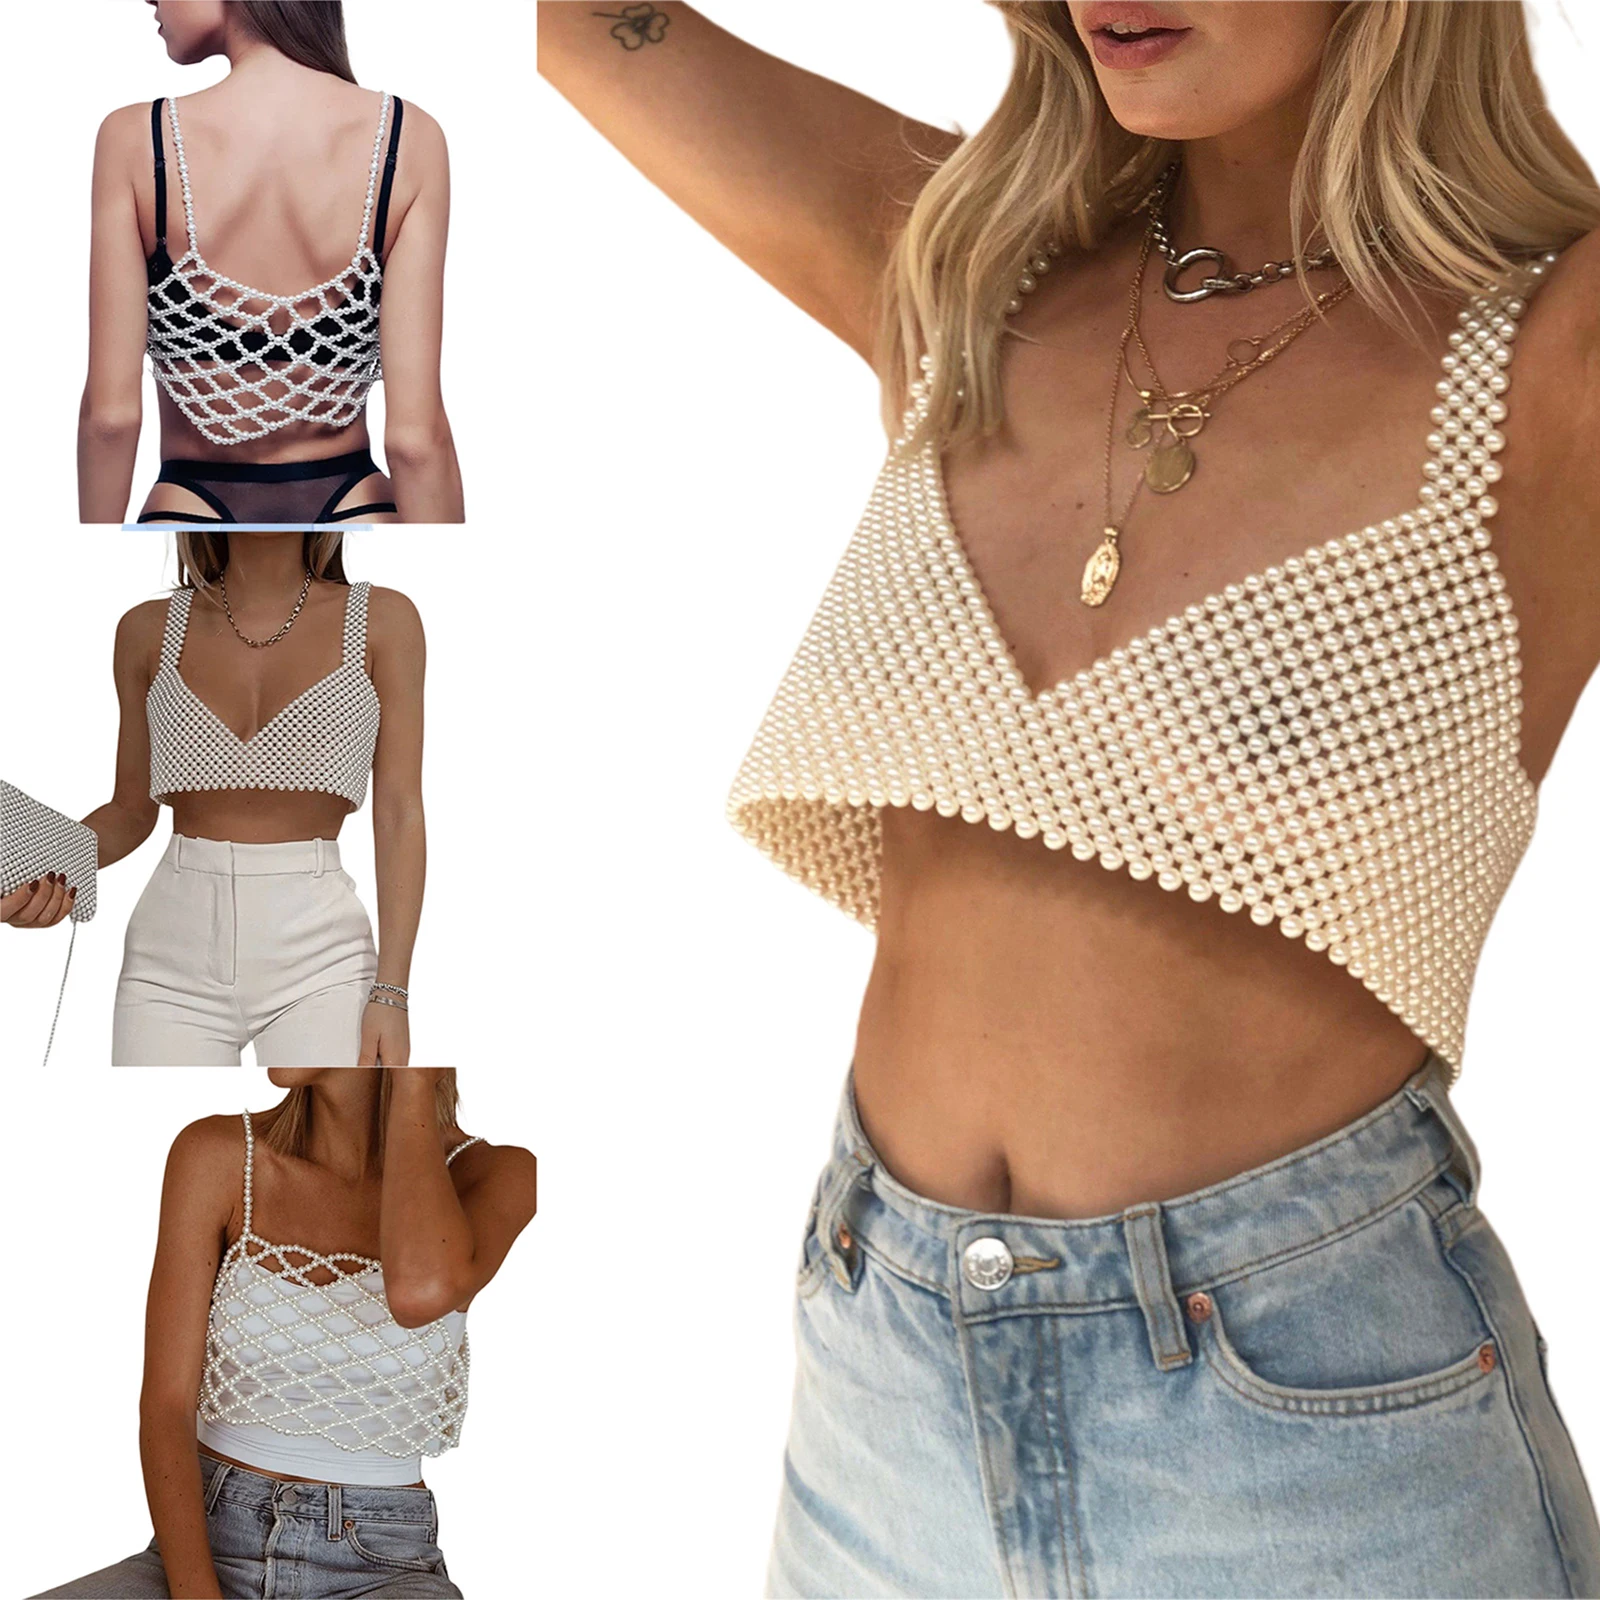 Sexy Pearl Beaded Crop Top For Women Spaghetti Strap Tank Bra Cover Up For  Parties And Streetwear From Shuishu, $33.74